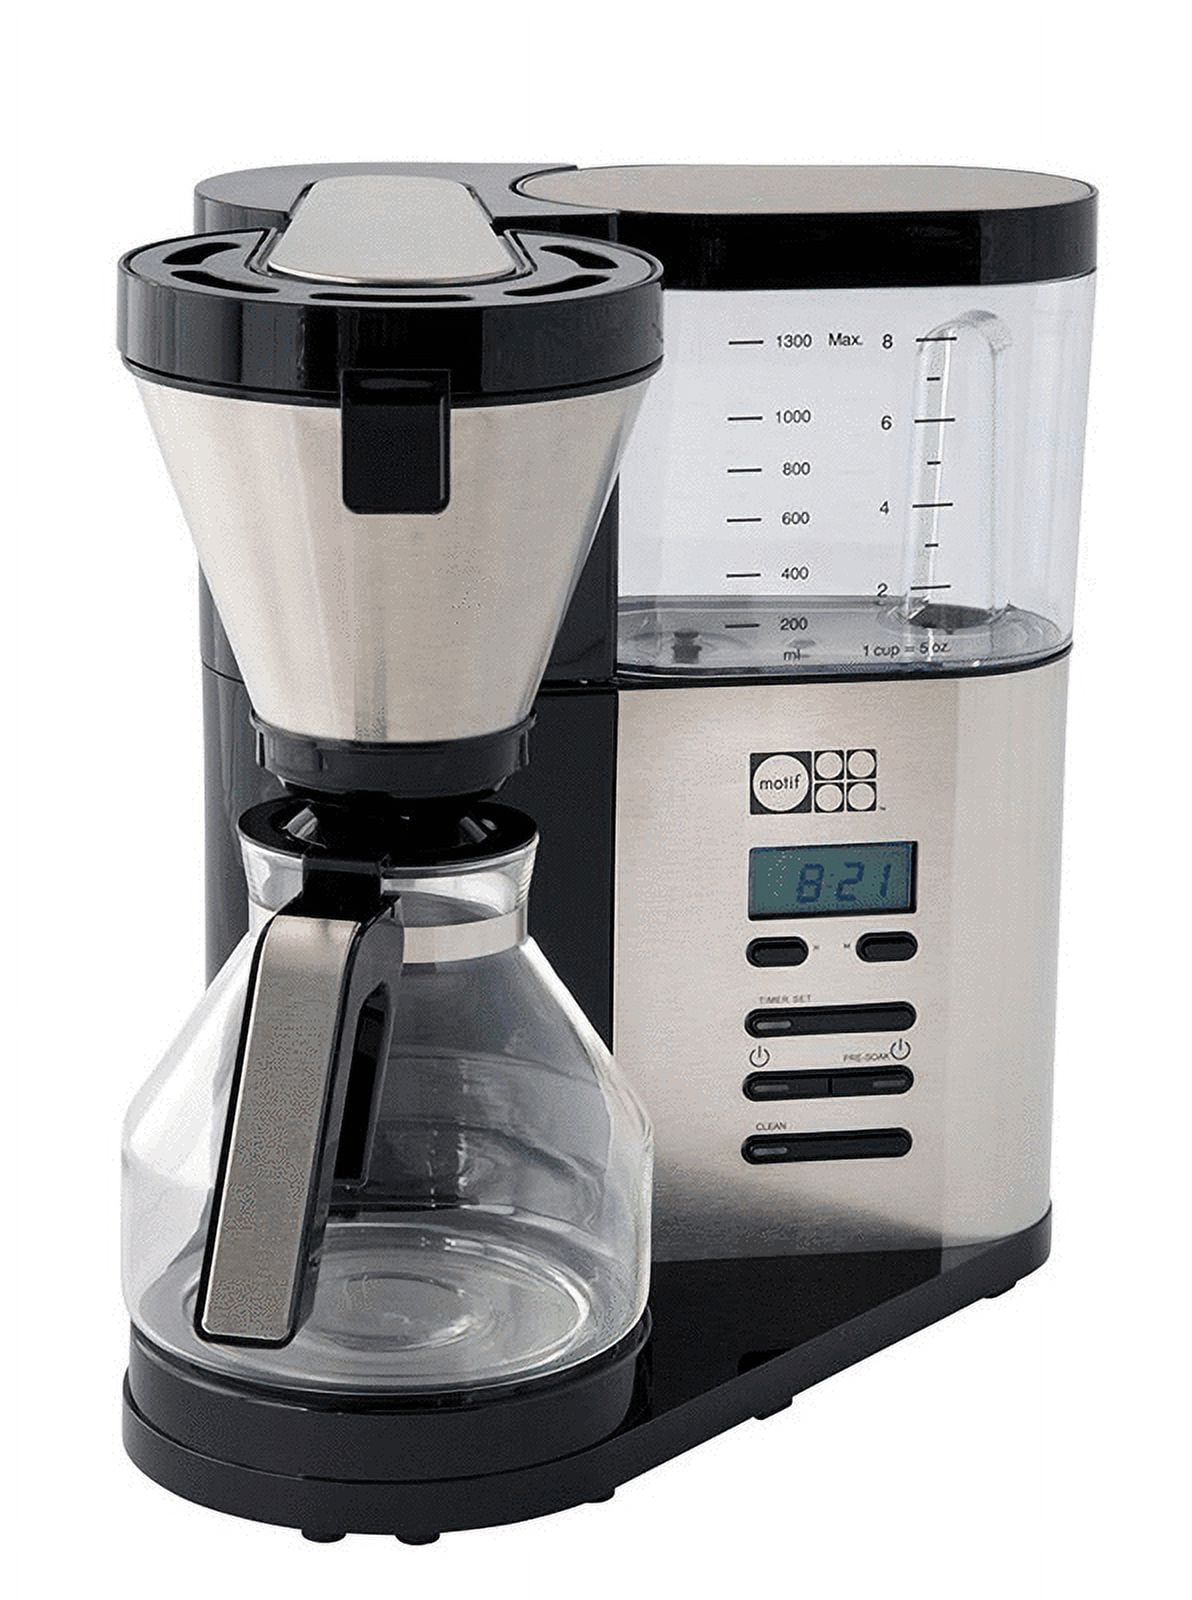 Atma Modern Coffee Maker - Elegant Design, 4/6 Cup Capacity, with Dosage  Spoon